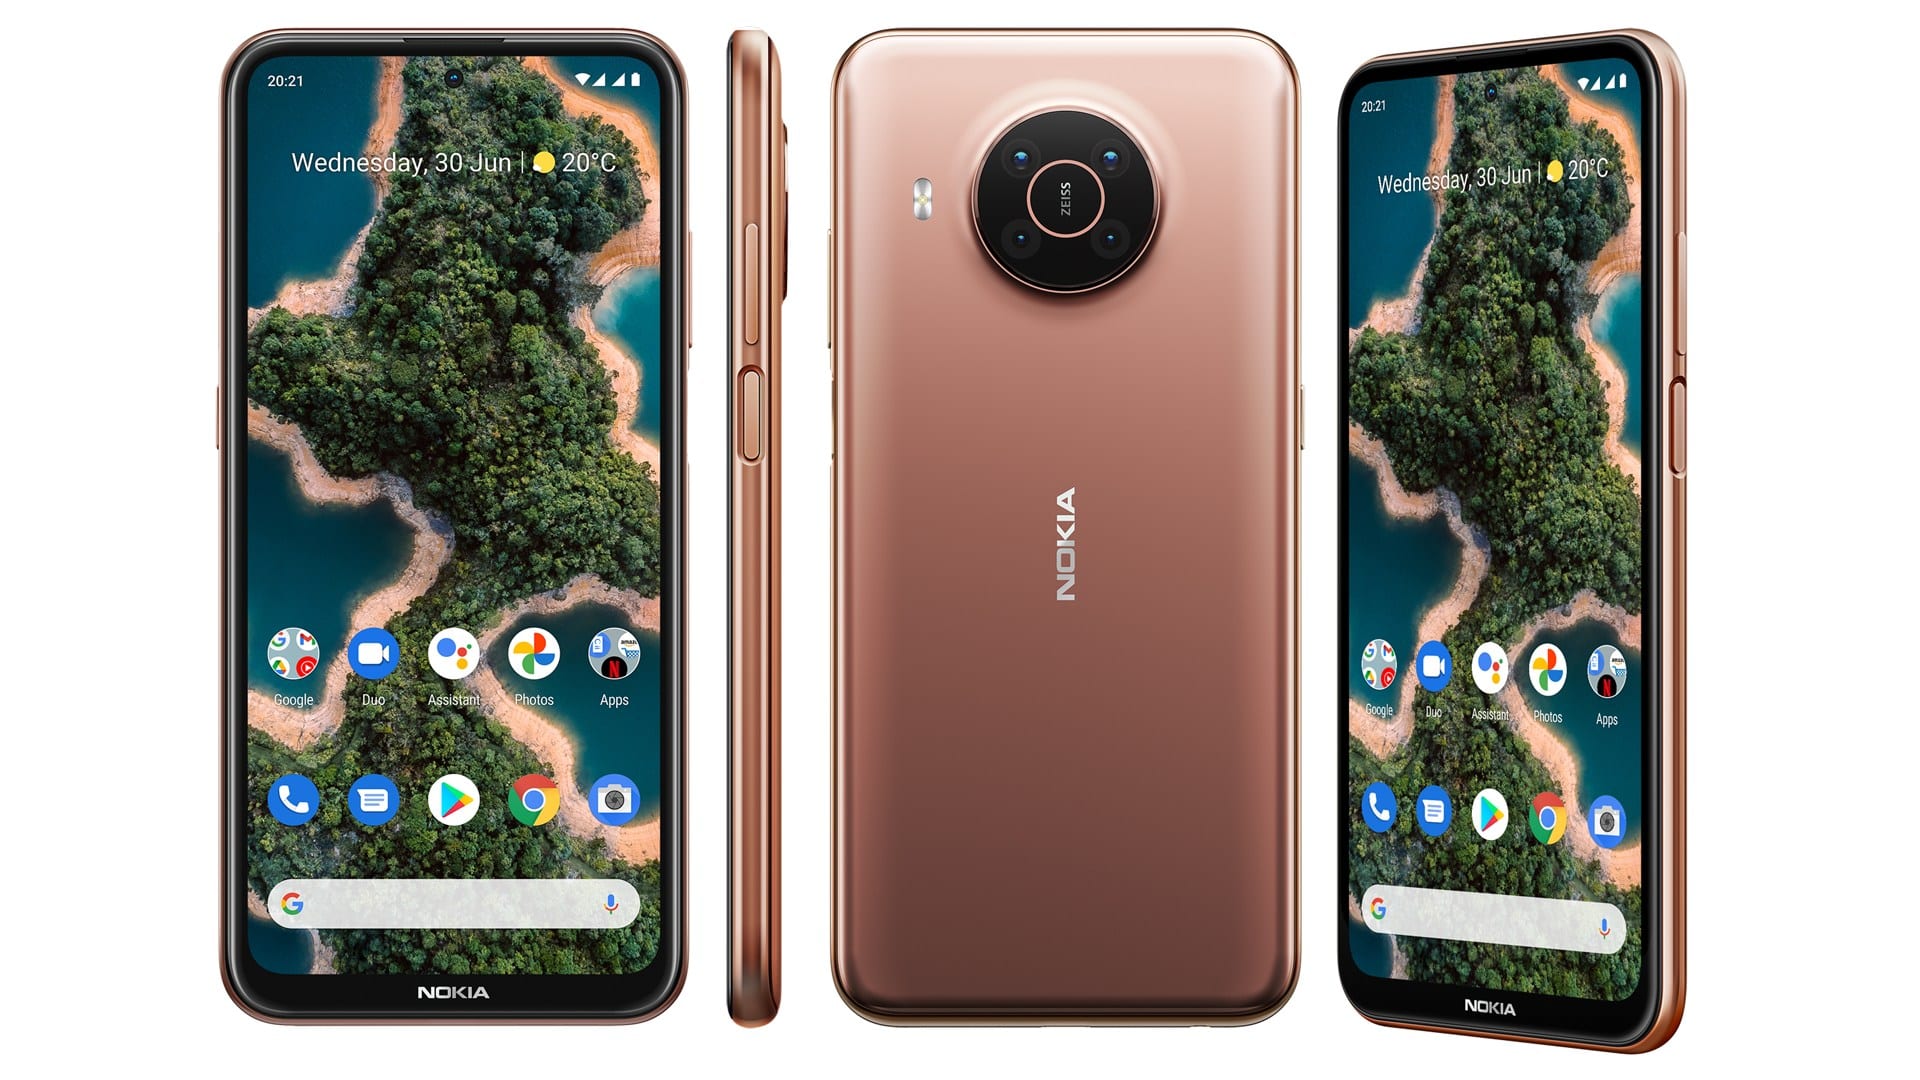 Nokia smartphones with Android